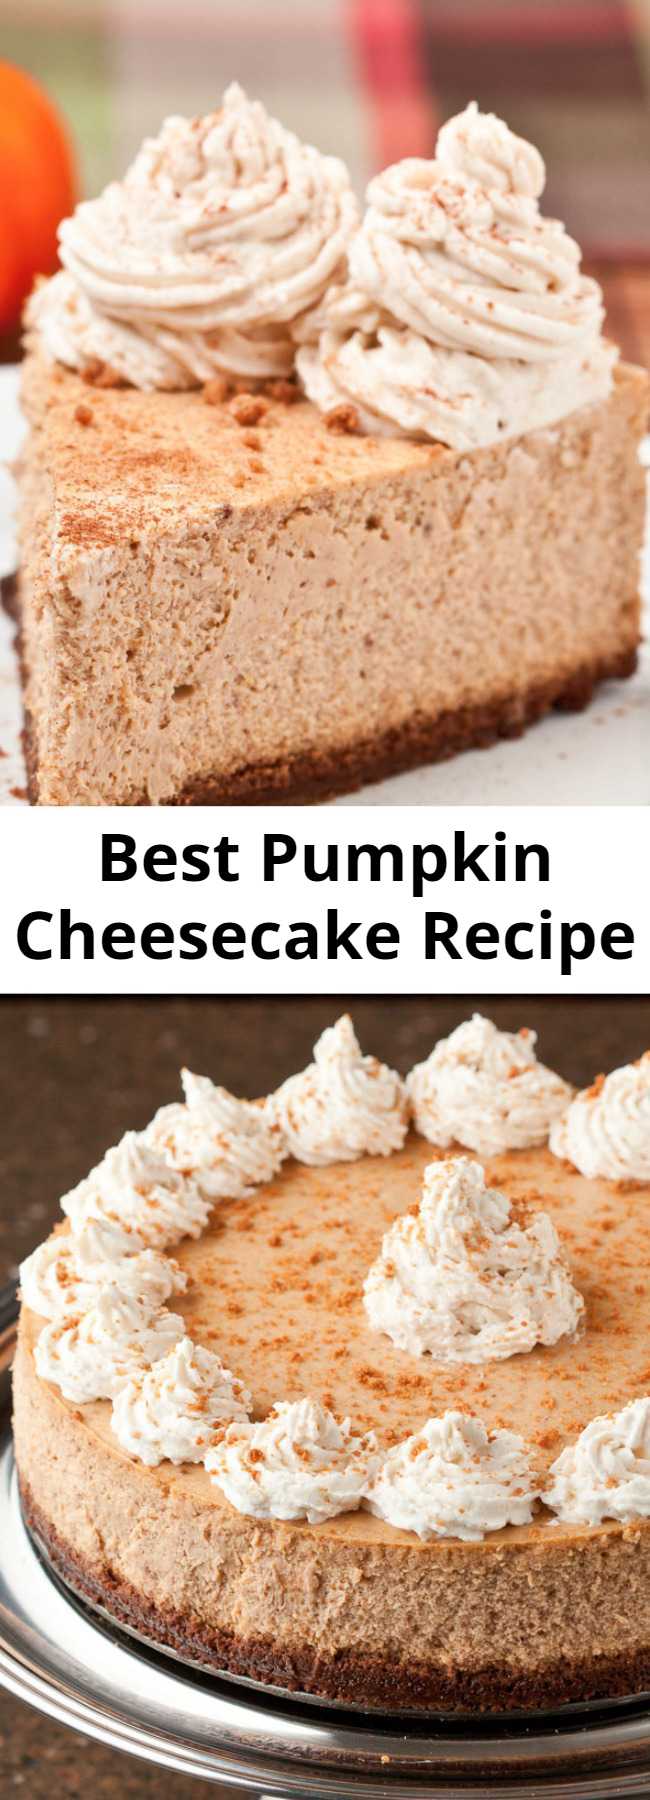 Best Pumpkin Cheesecake Recipe - Every bit as good or better than Cheesecake Factory’s seasonal pumpkin cheesecake. NY style Pumpkin Cheesecake that’s high, dense, and rich. The flavors of fall spices, pumpkin, and cream cheese meld together like no other. On top of a gingersnap crust. Seriously.